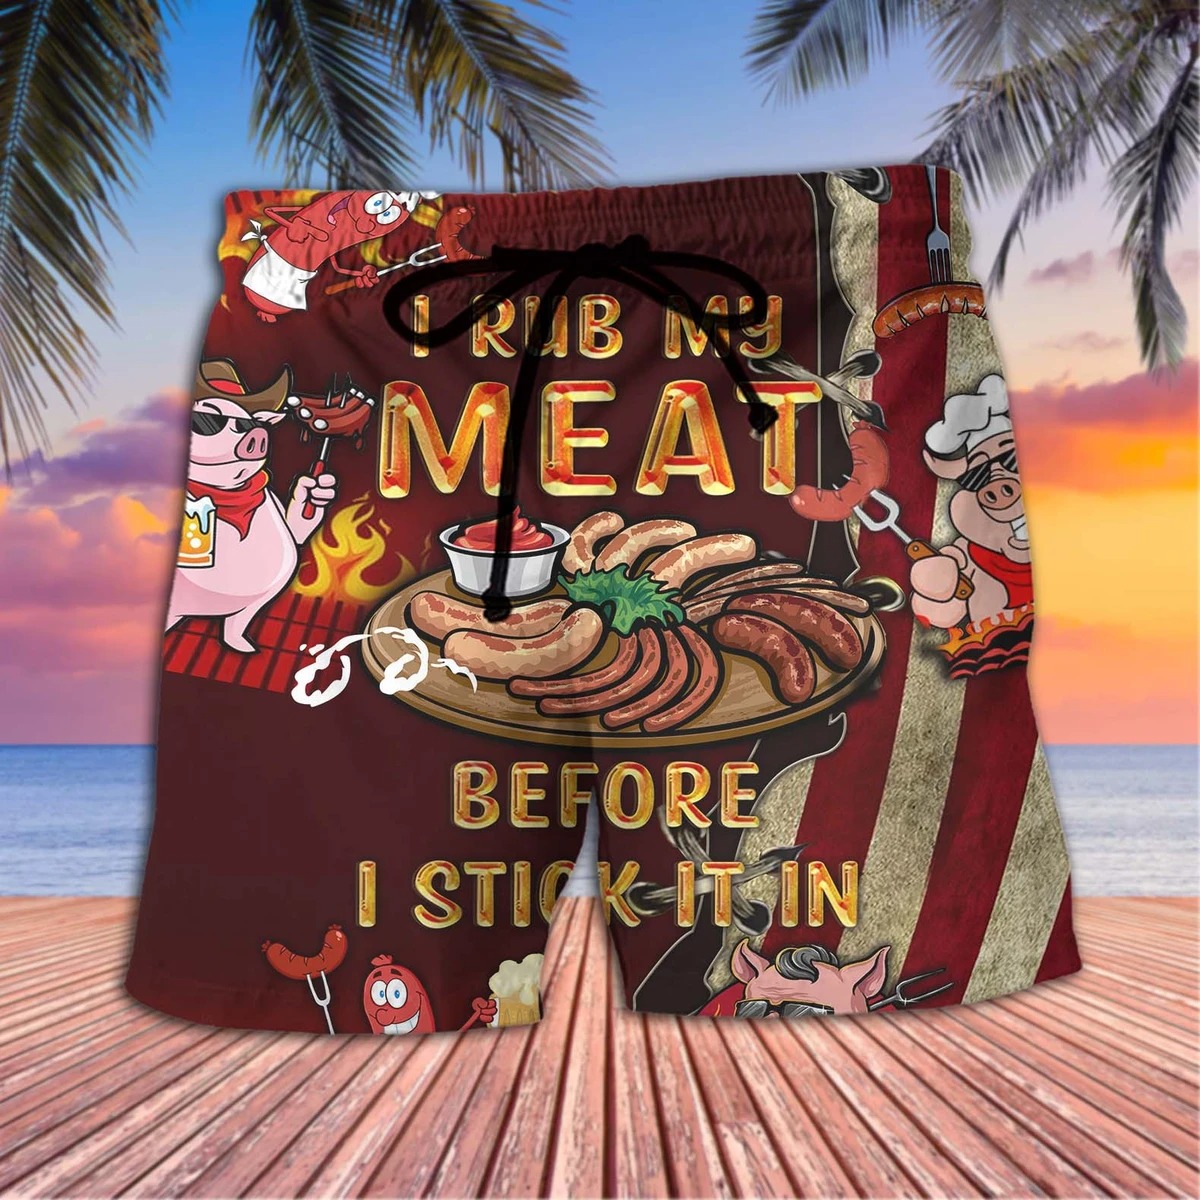 Food I Rub My Meat Before I Stick It In Cute Pig Meat Party Hawaiian Shirt Short Pant photo